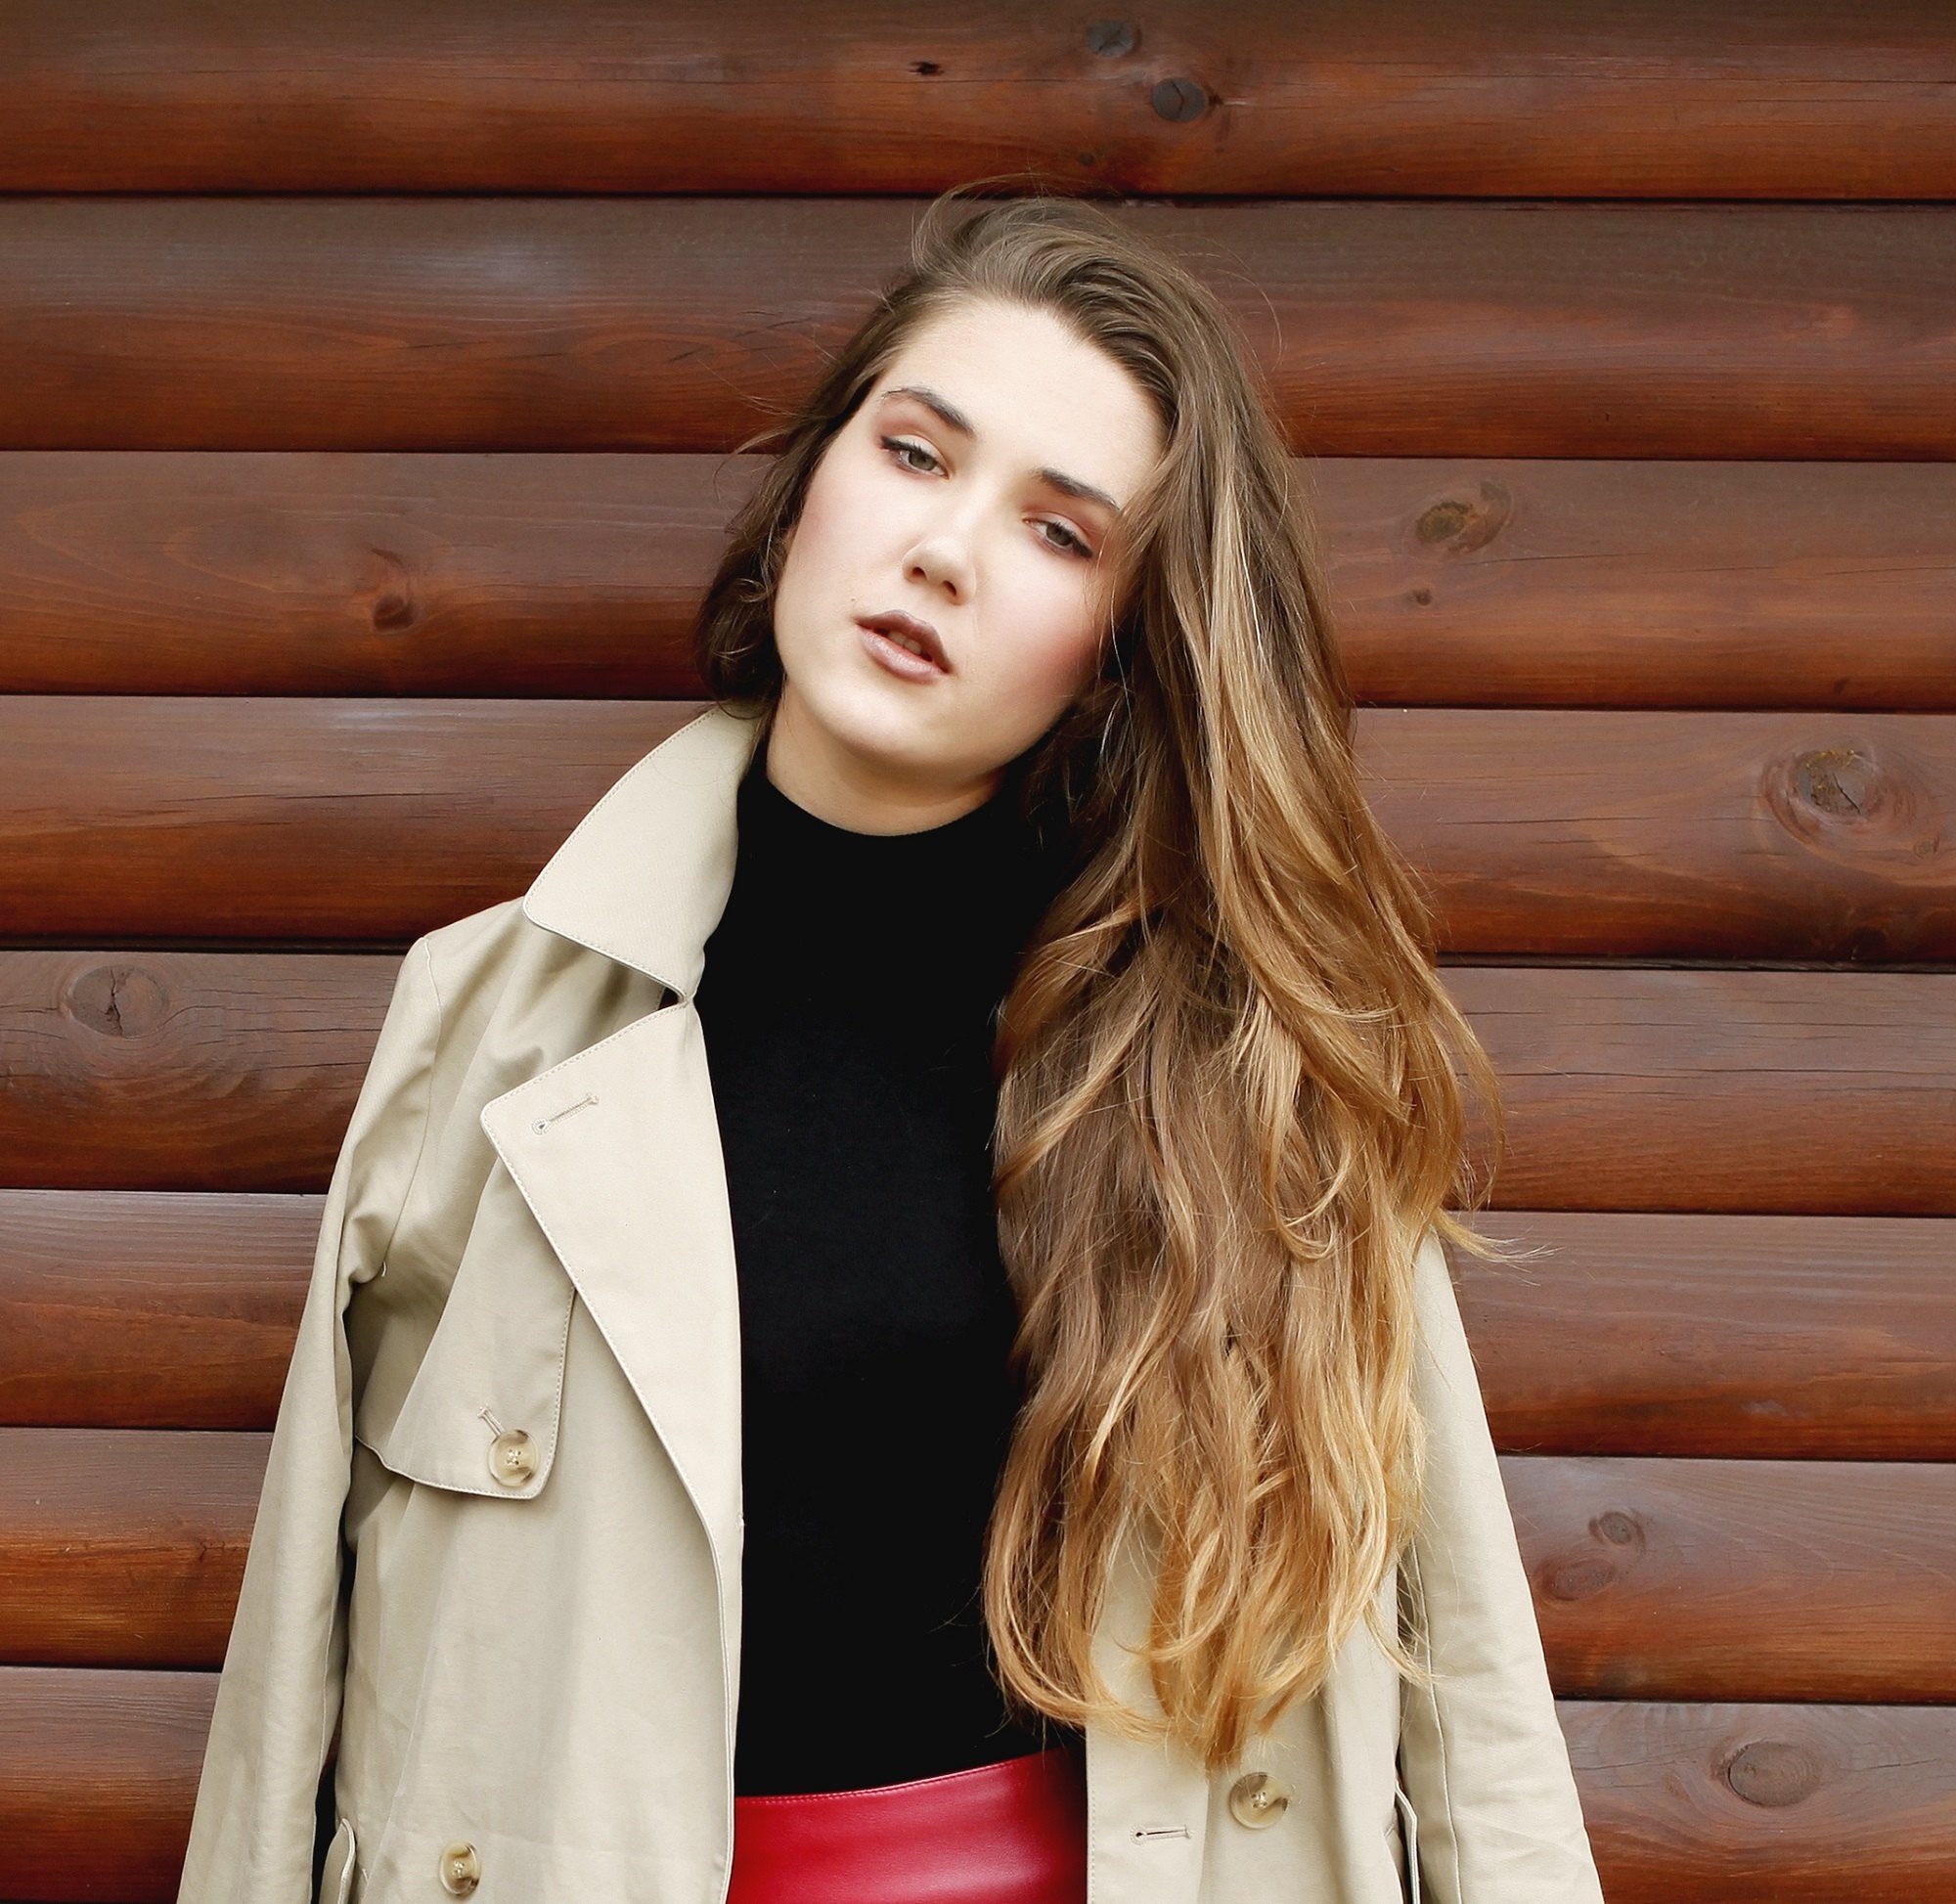 Brown ombre hair: Woman wearing a black top and red skirt and cream-colored coat with bronde wavy hair